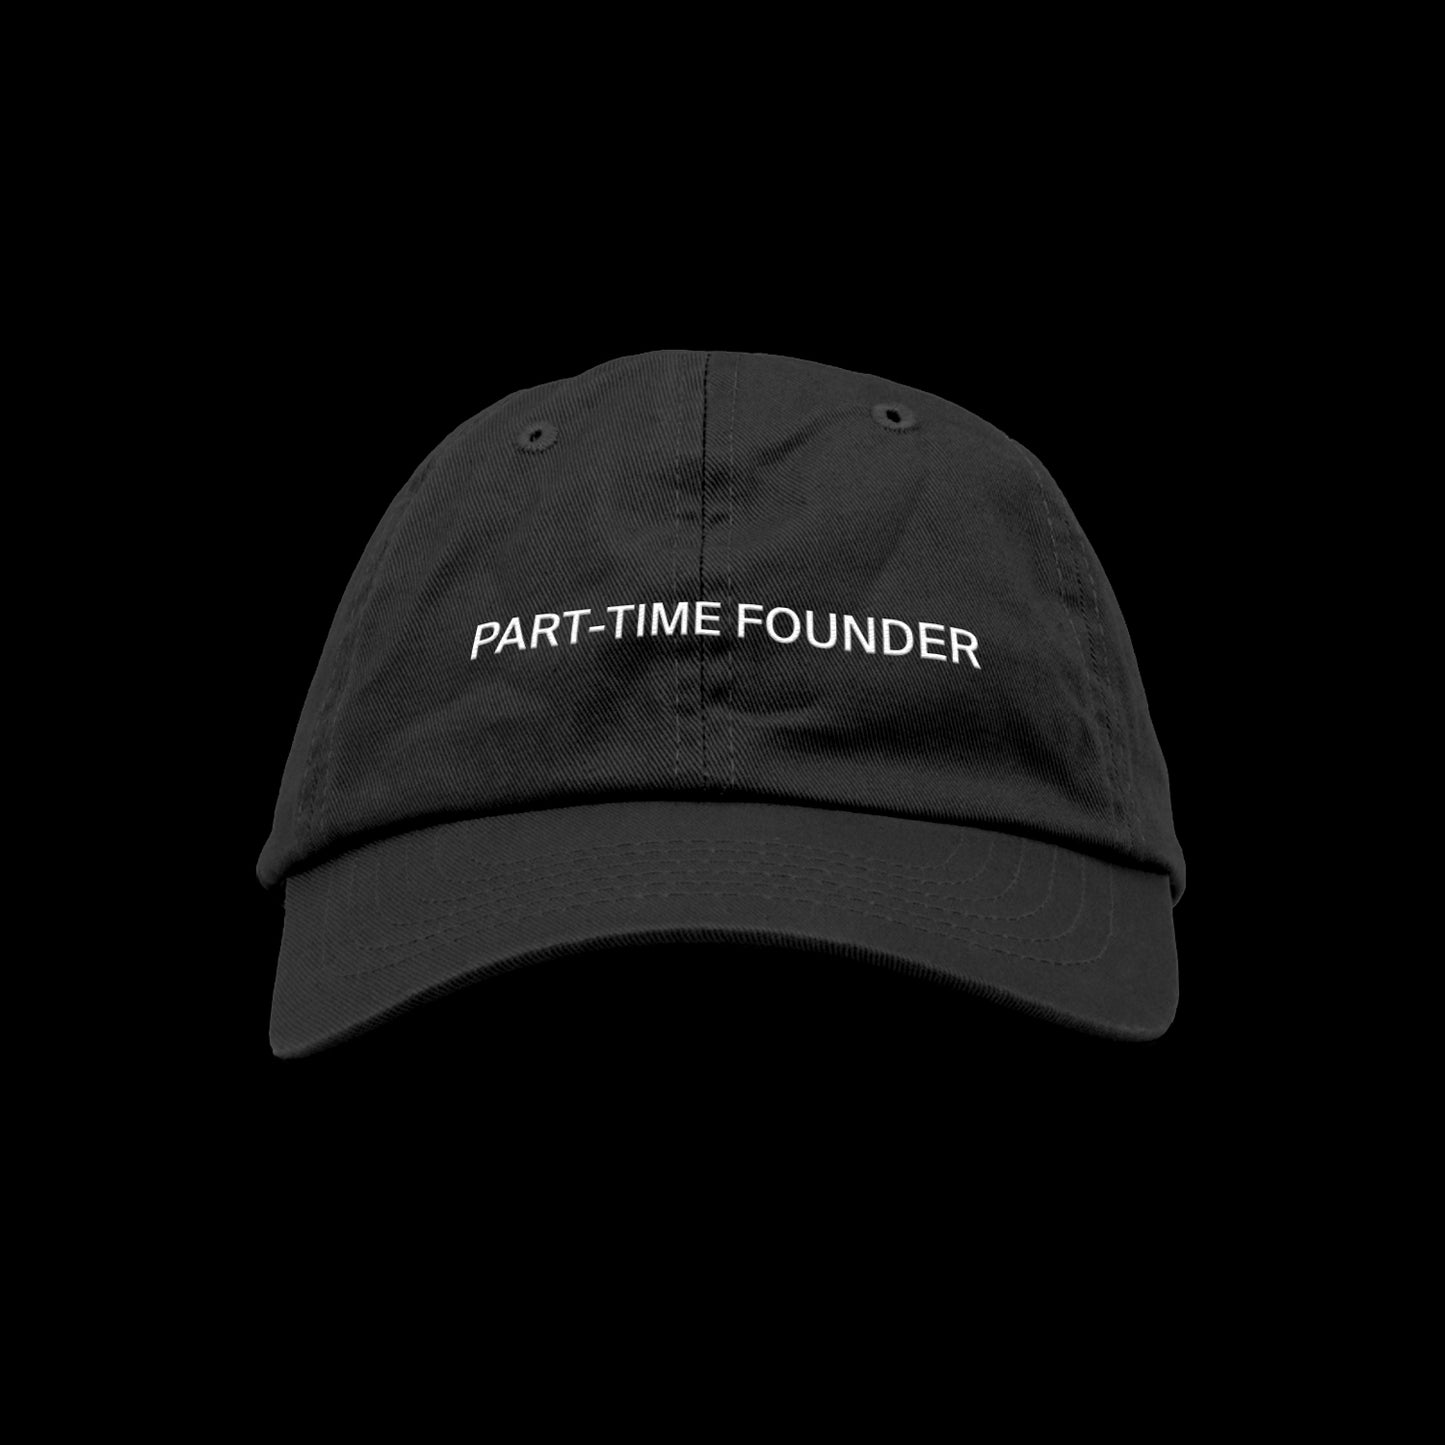 PART-TIME FOUNDER